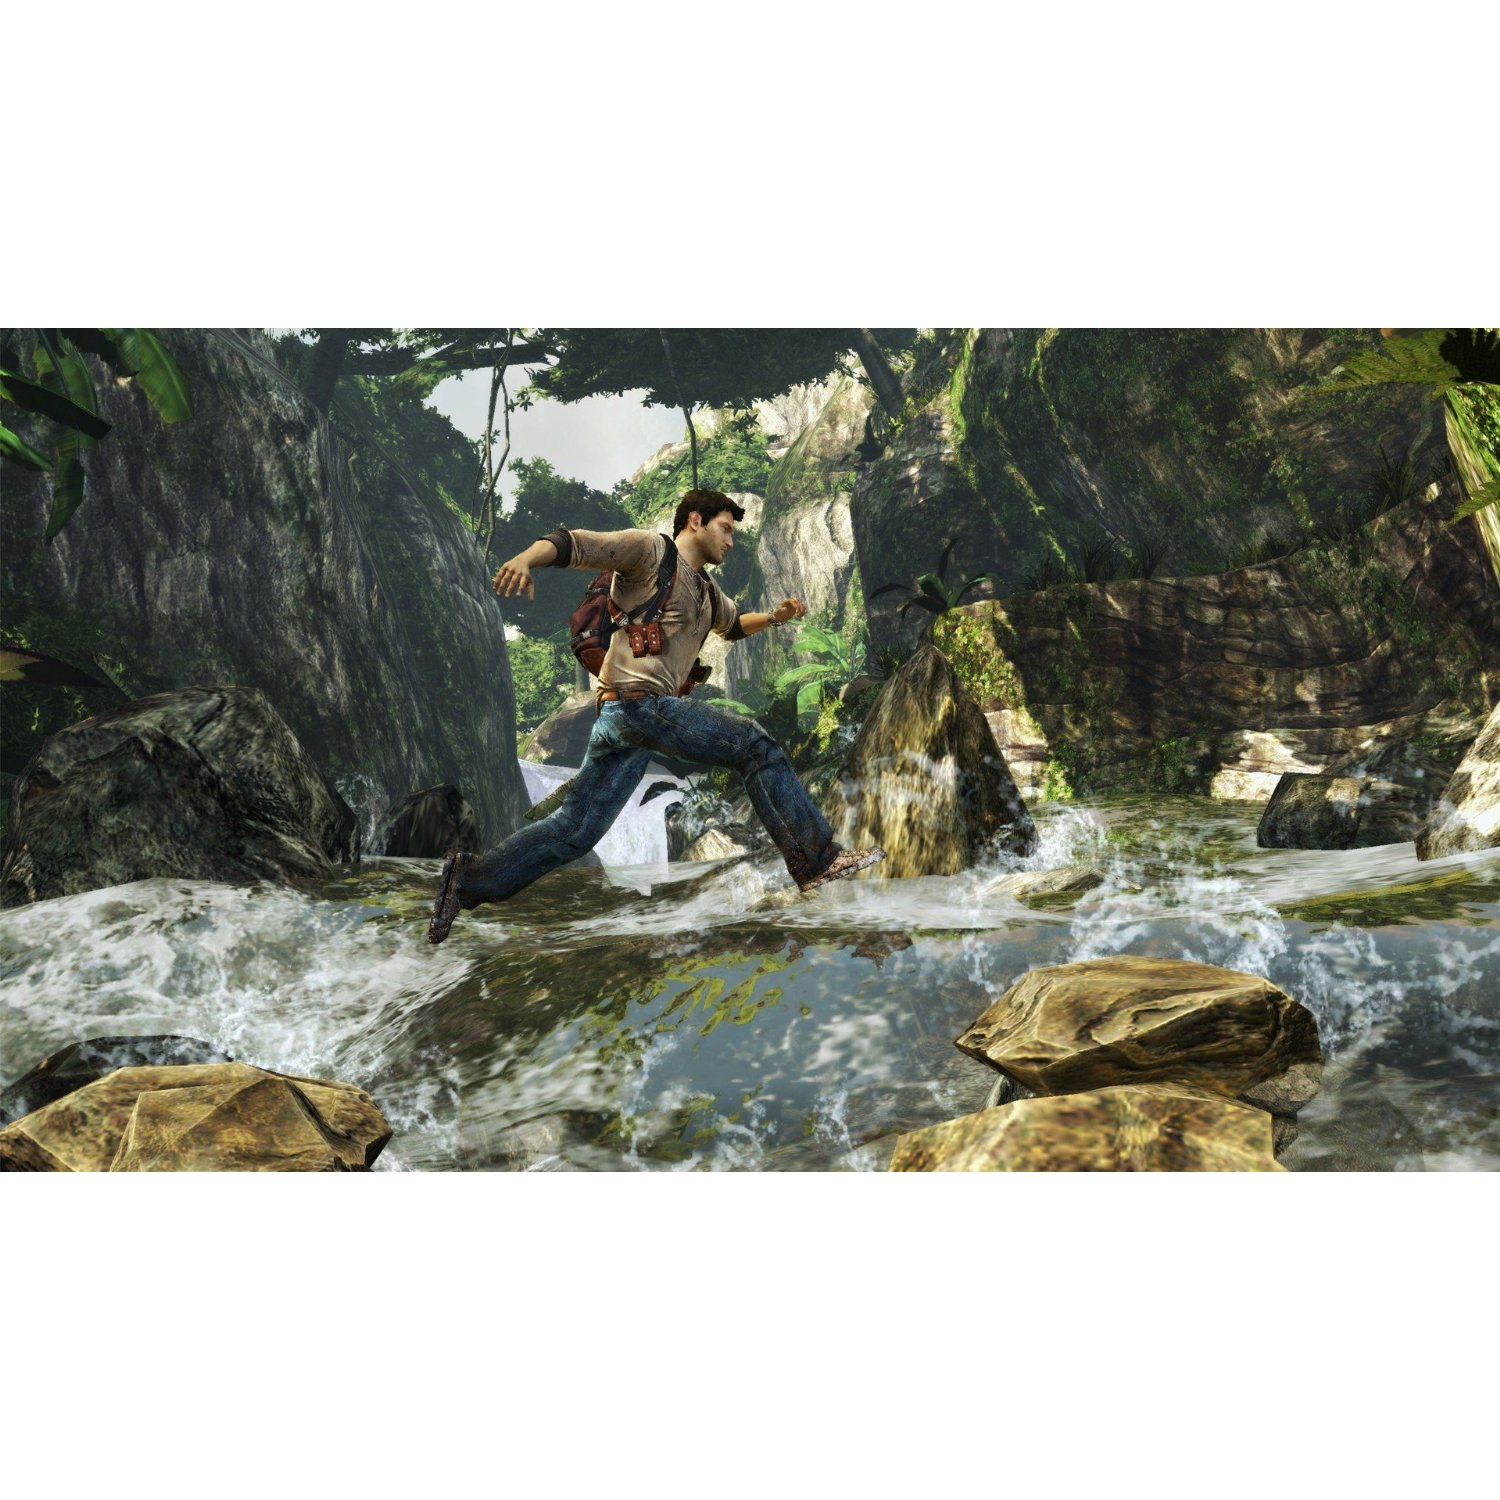 http://thetechjournal.com/wp-content/uploads/images/1112/1324125461-uncharted-golden-abyss-game-for-preorder-4.jpg